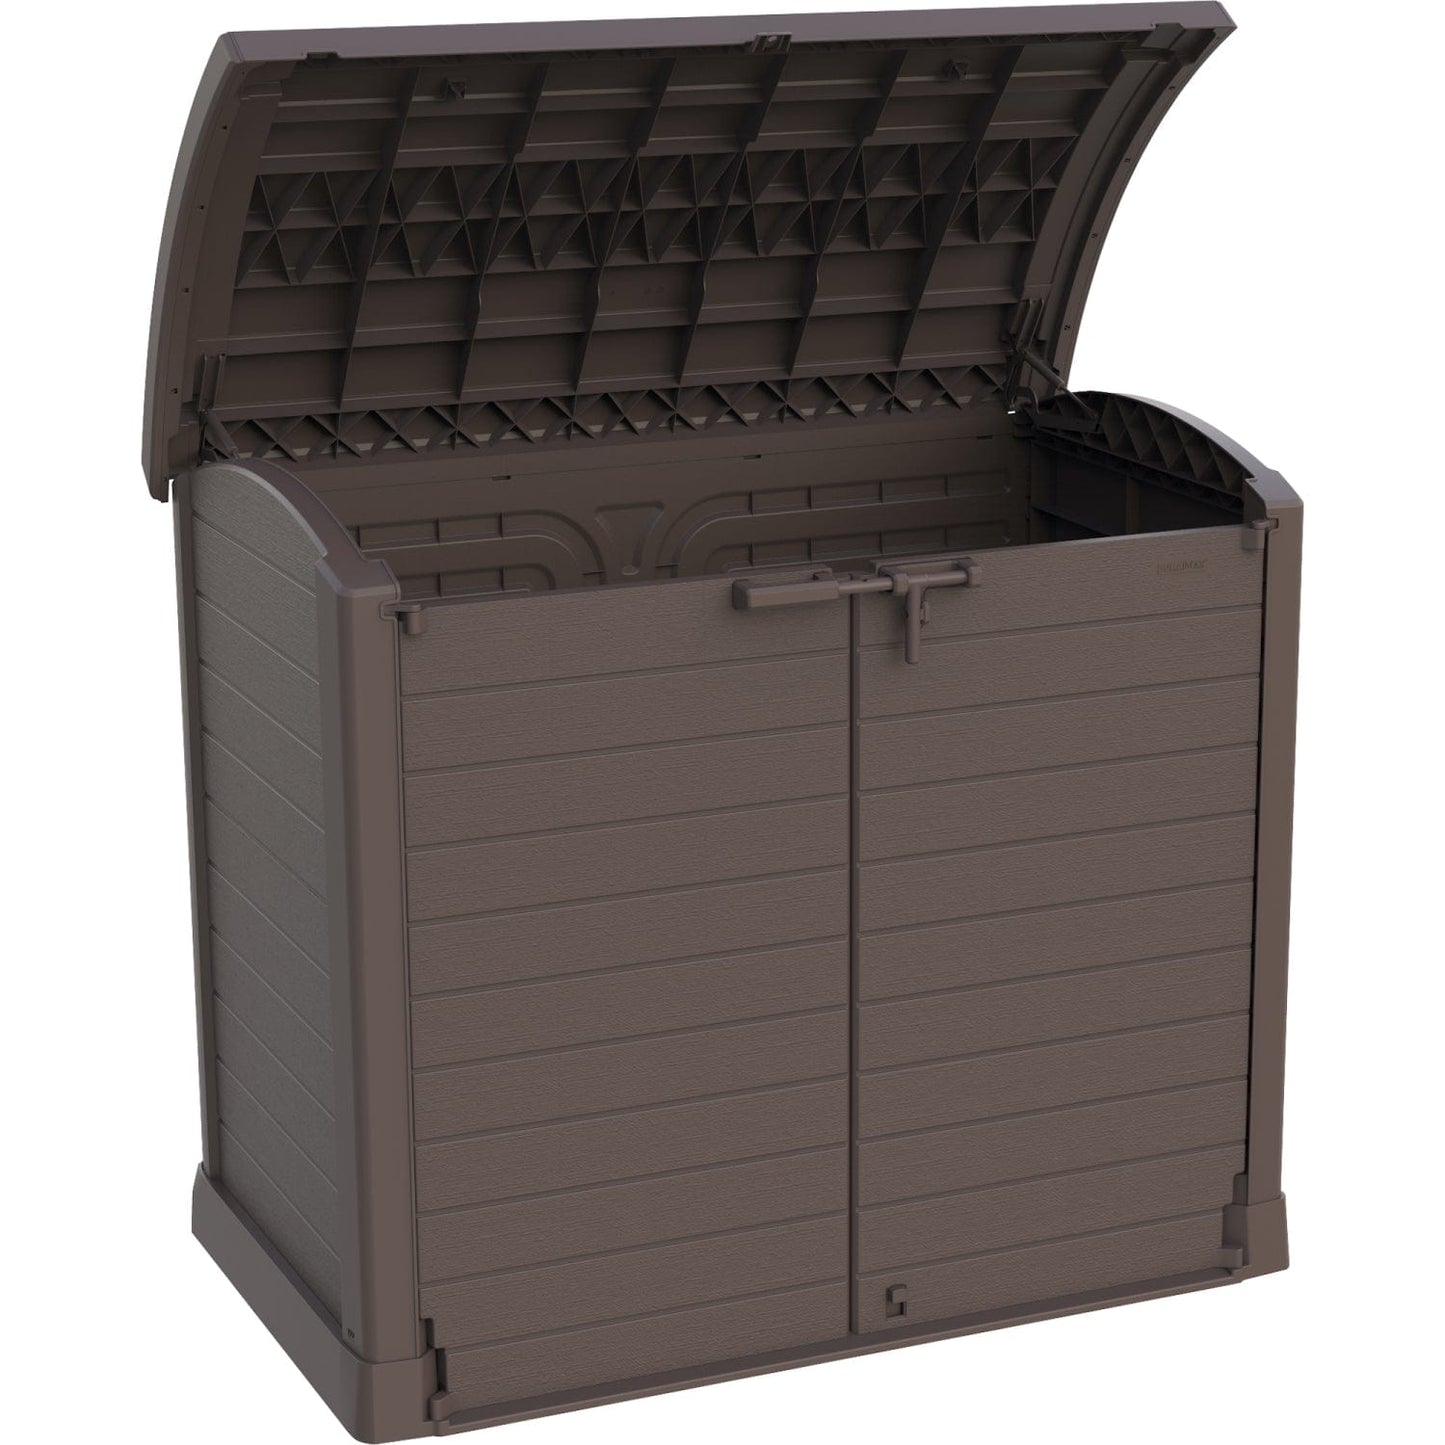 Duramax shed cabinet DuraMax | Heavy Plastic StoreAway Multipurpose Horizontal Shed with Arc Lid - 1200L - Brown 86632